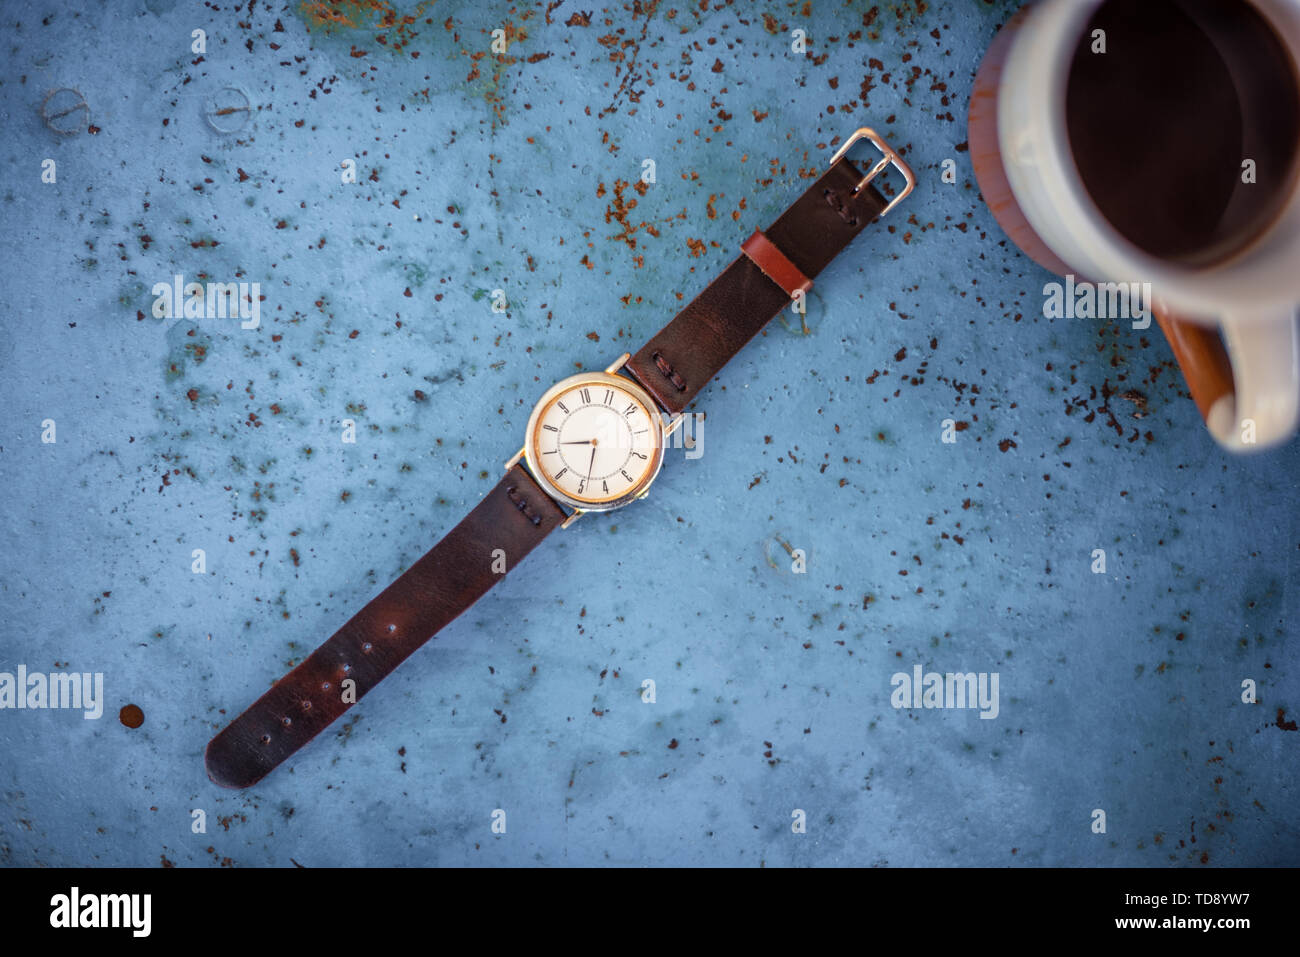 Vintage wrist watch on rustic blue metal bench suggesting the time is 07.00, a cup of coffee in the edge of frame. Stock Photo